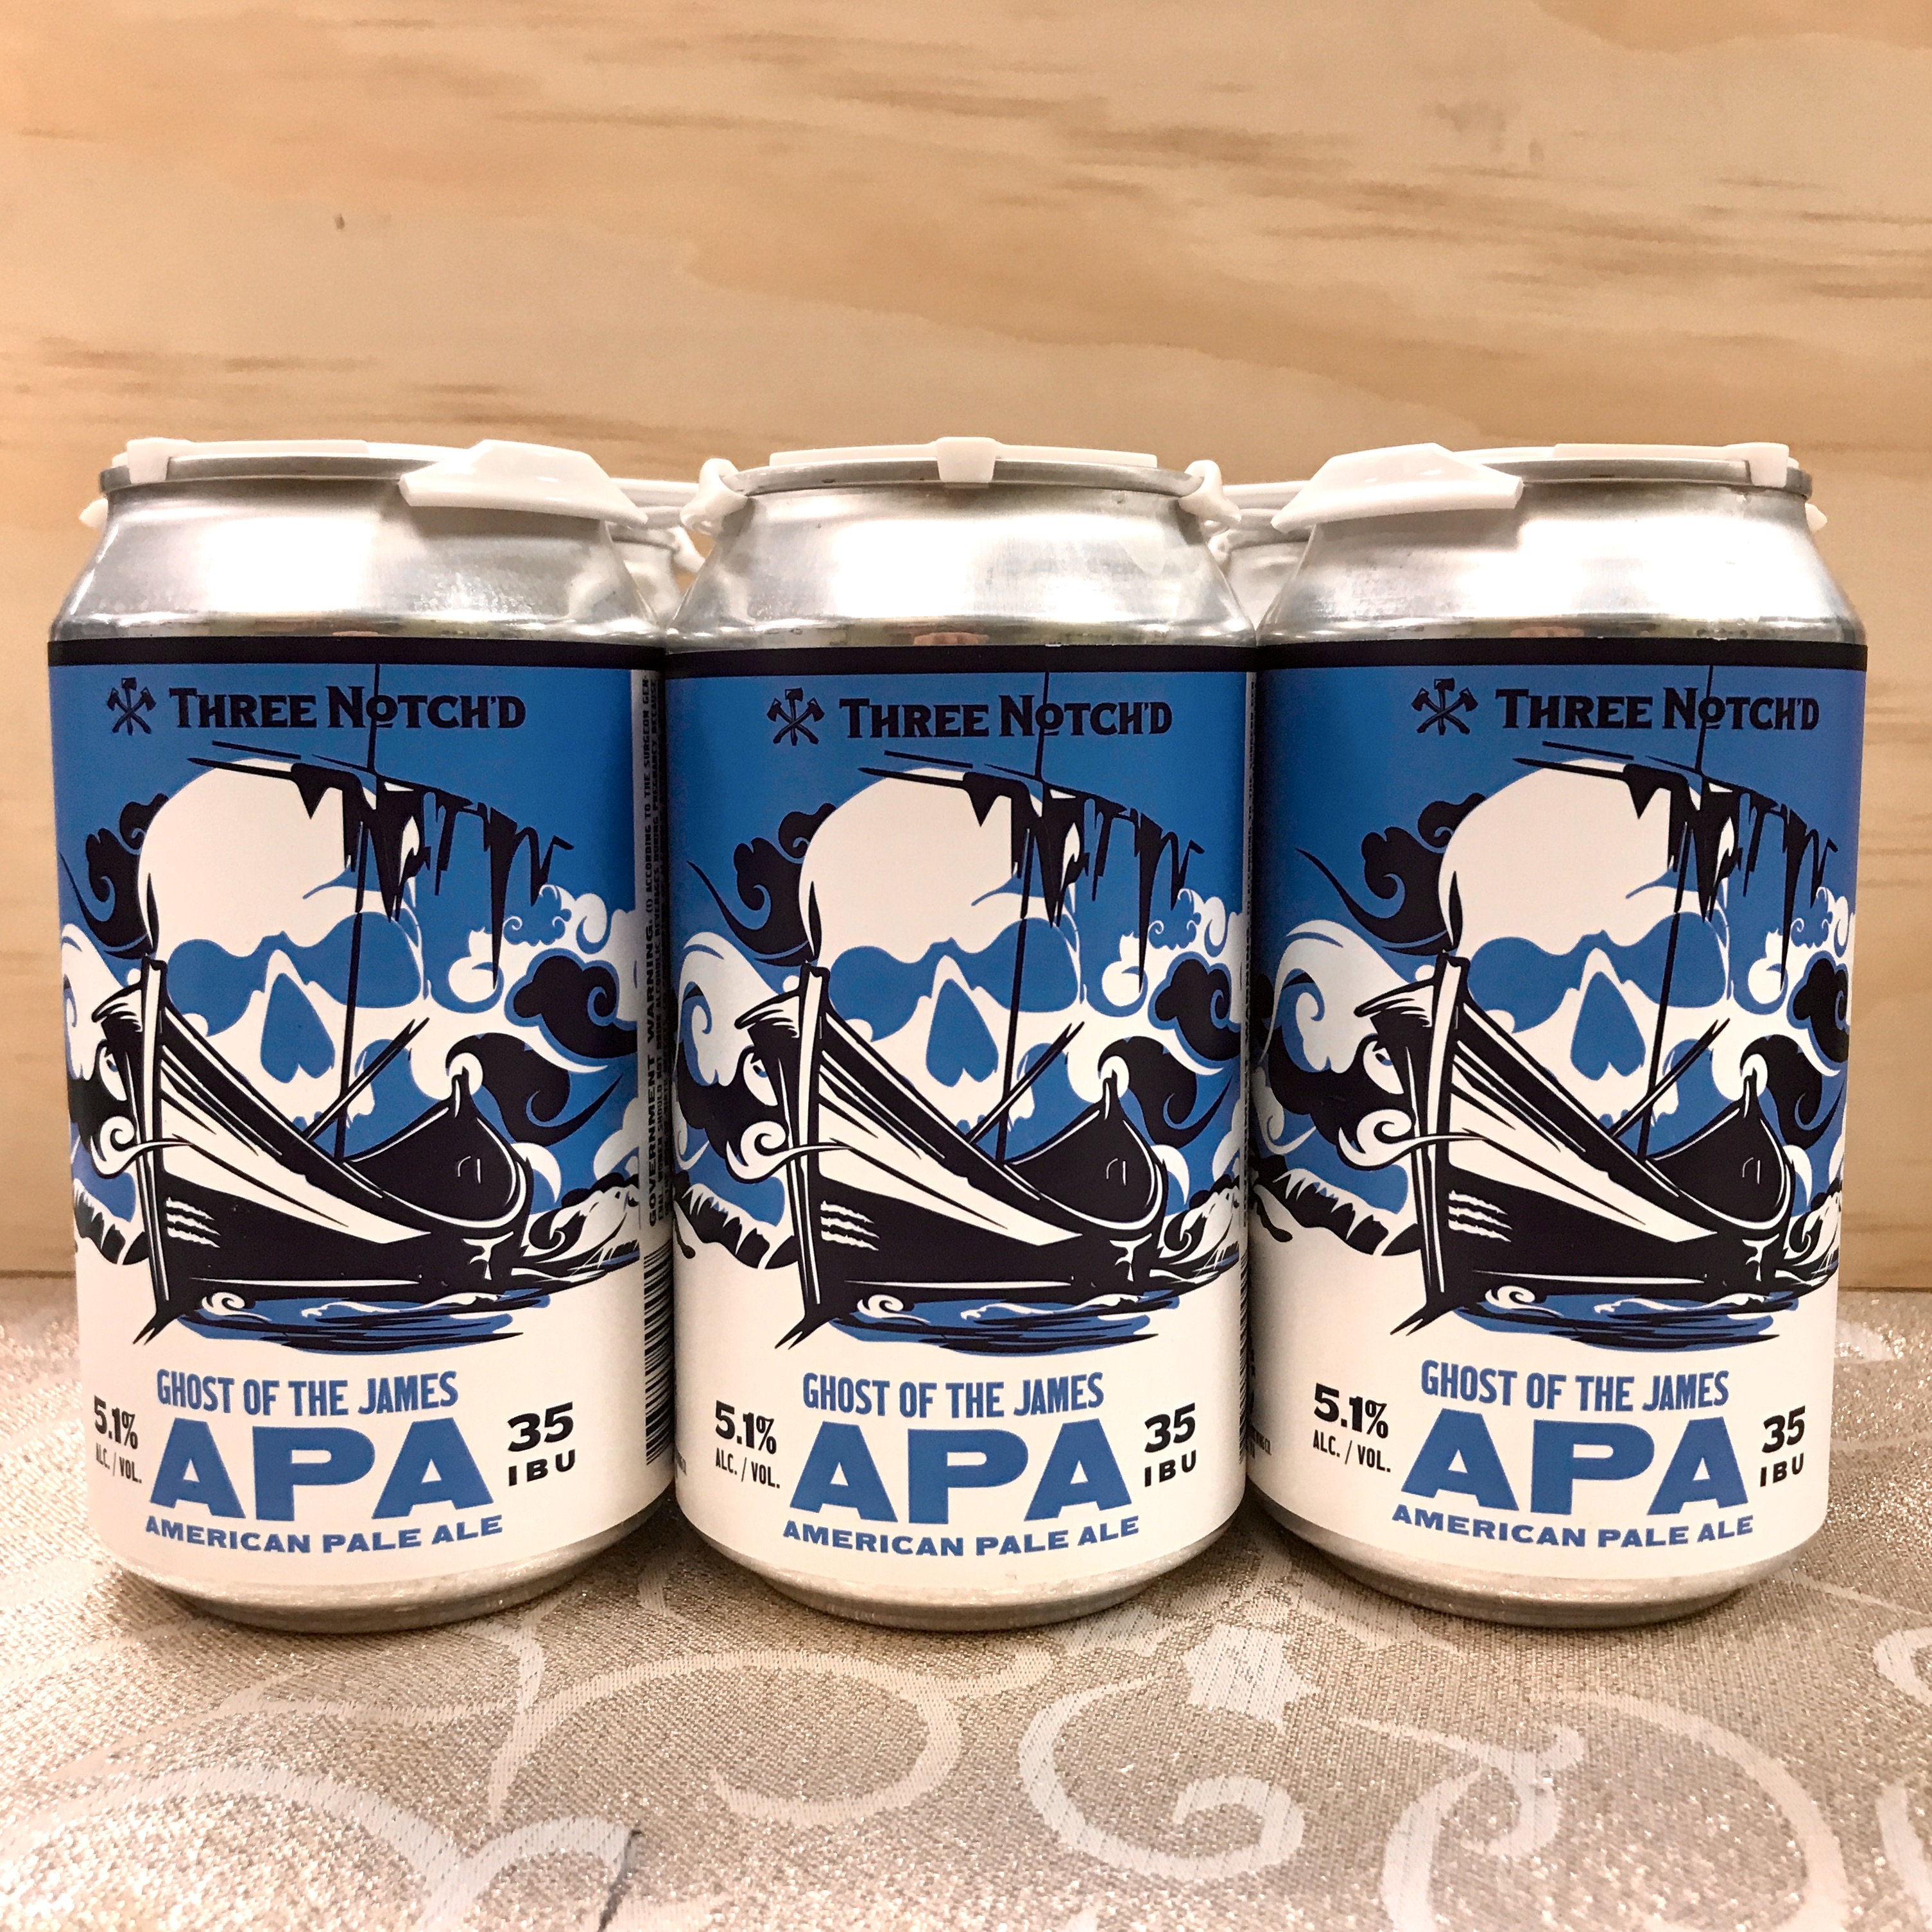 Three Notch'd Ghost of the James America Pale Ale 6 x 12oz cans